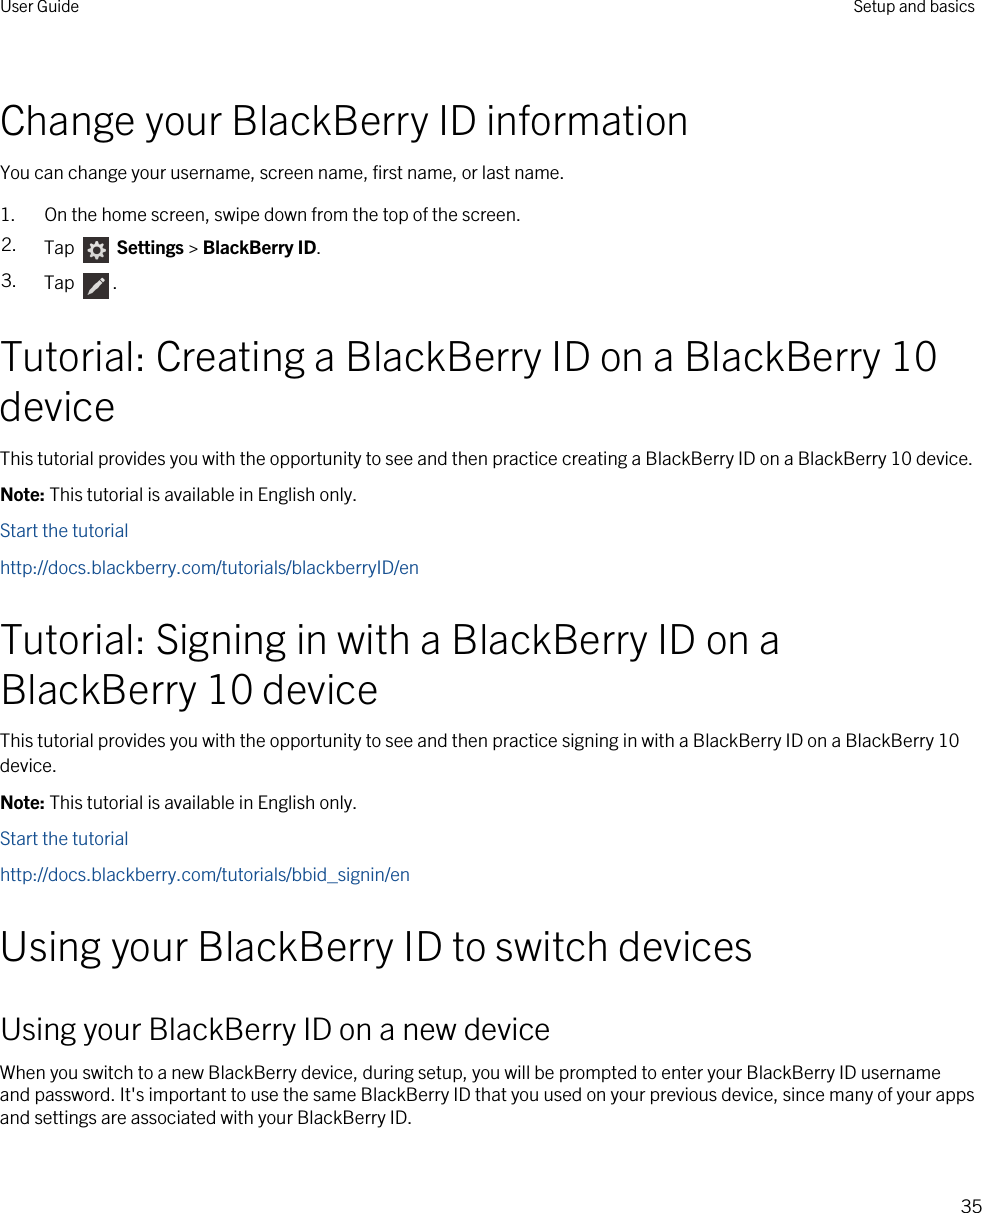 Change your BlackBerry ID informationYou can change your username, screen name, first name, or last name.1. On the home screen, swipe down from the top of the screen.2. Tap   Settings &gt; BlackBerry ID.3. Tap  .Tutorial: Creating a BlackBerry ID on a BlackBerry 10 deviceThis tutorial provides you with the opportunity to see and then practice creating a BlackBerry ID on a BlackBerry 10 device.Note: This tutorial is available in English only.Start the tutorialhttp://docs.blackberry.com/tutorials/blackberryID/enTutorial: Signing in with a BlackBerry ID on a BlackBerry 10 deviceThis tutorial provides you with the opportunity to see and then practice signing in with a BlackBerry ID on a BlackBerry 10 device.Note: This tutorial is available in English only.Start the tutorialhttp://docs.blackberry.com/tutorials/bbid_signin/enUsing your BlackBerry ID to switch devicesUsing your BlackBerry ID on a new deviceWhen you switch to a new BlackBerry device, during setup, you will be prompted to enter your BlackBerry ID username and password. It&apos;s important to use the same BlackBerry ID that you used on your previous device, since many of your apps and settings are associated with your BlackBerry ID.User Guide Setup and basics35